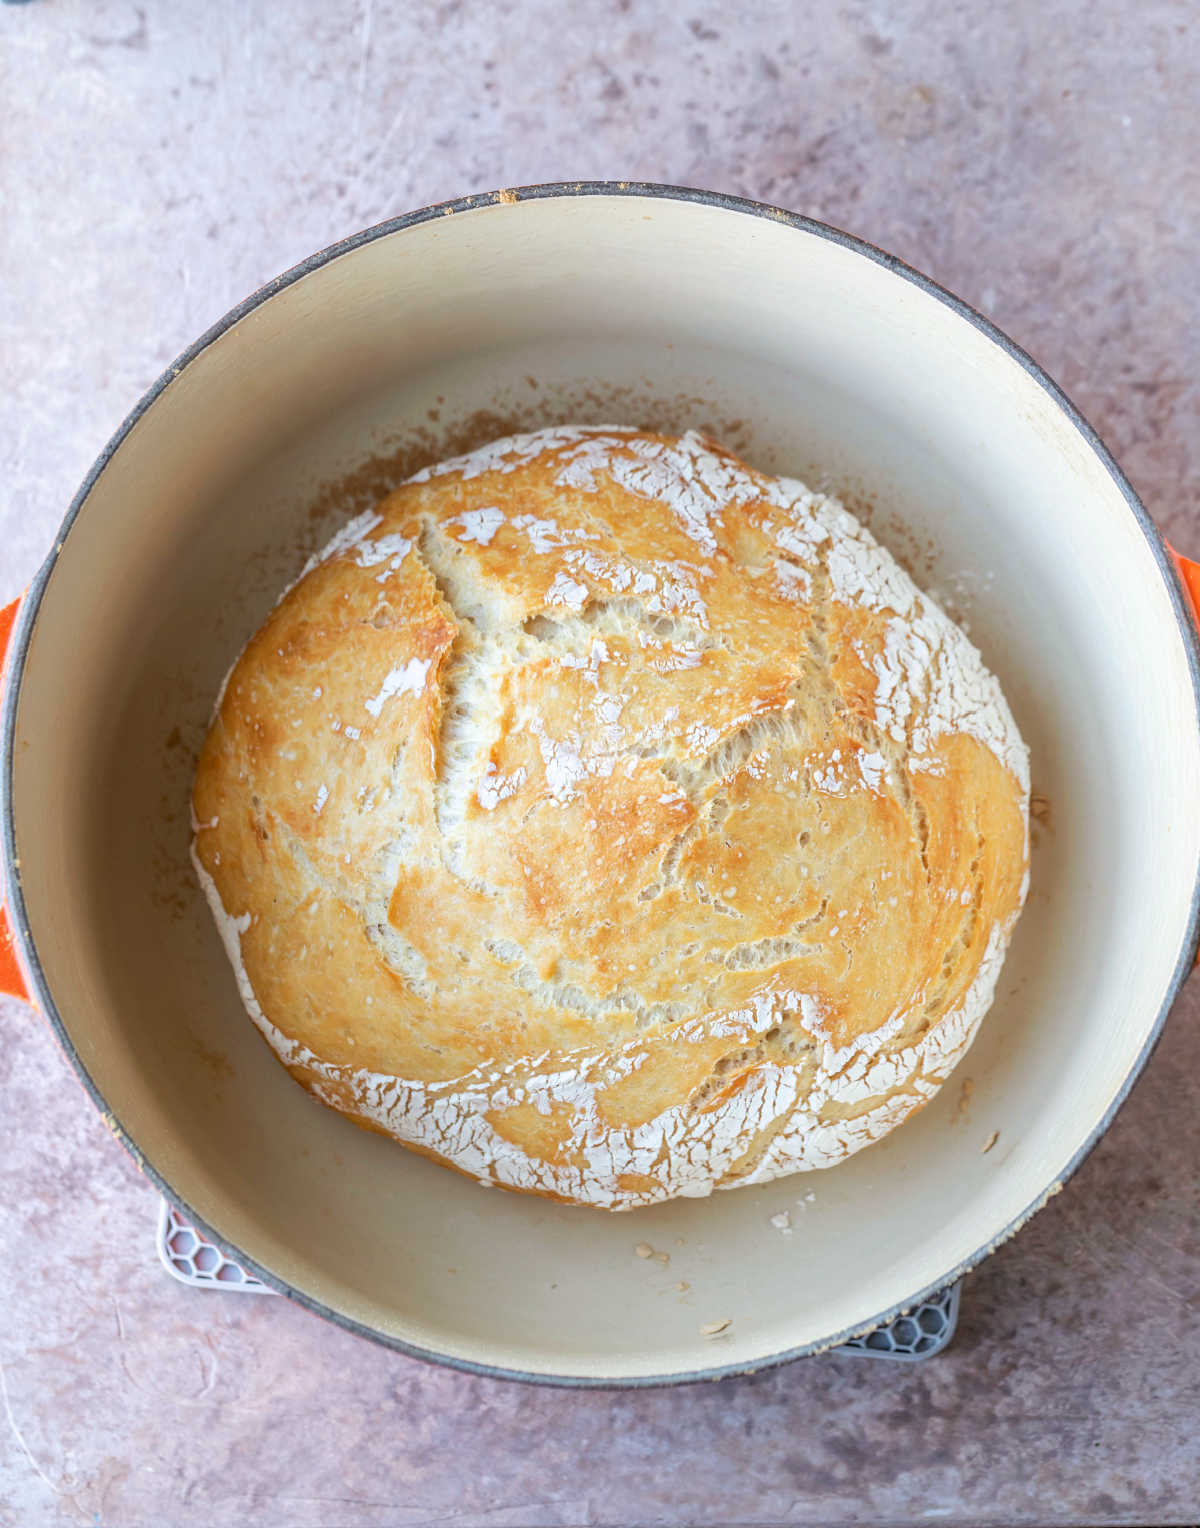 Baked no knead bread in a Dutch oven.